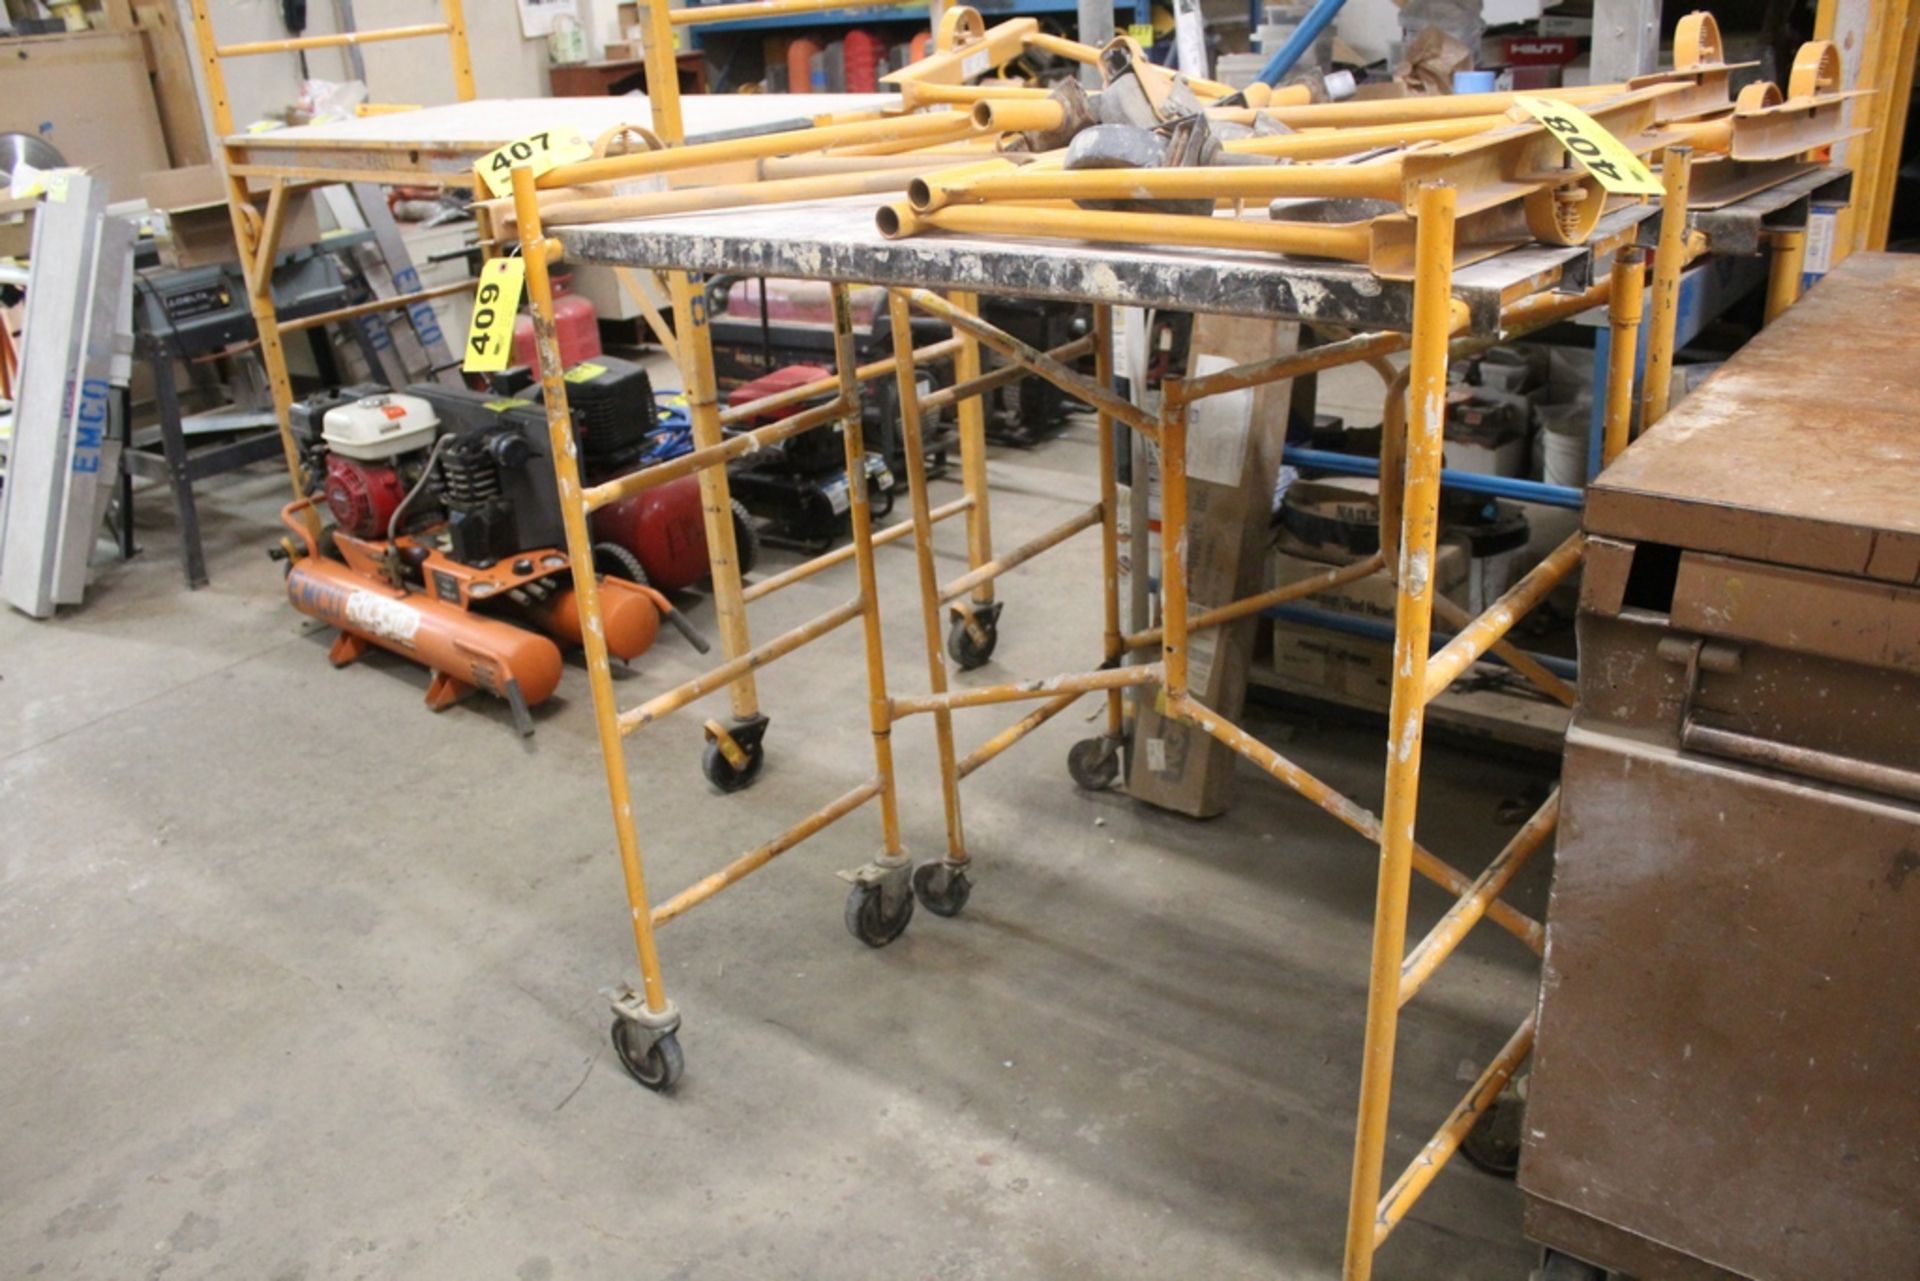 4' PORTABLE FOLDING SCAFFOLD-48" X 42" X 20", WITH PLANK